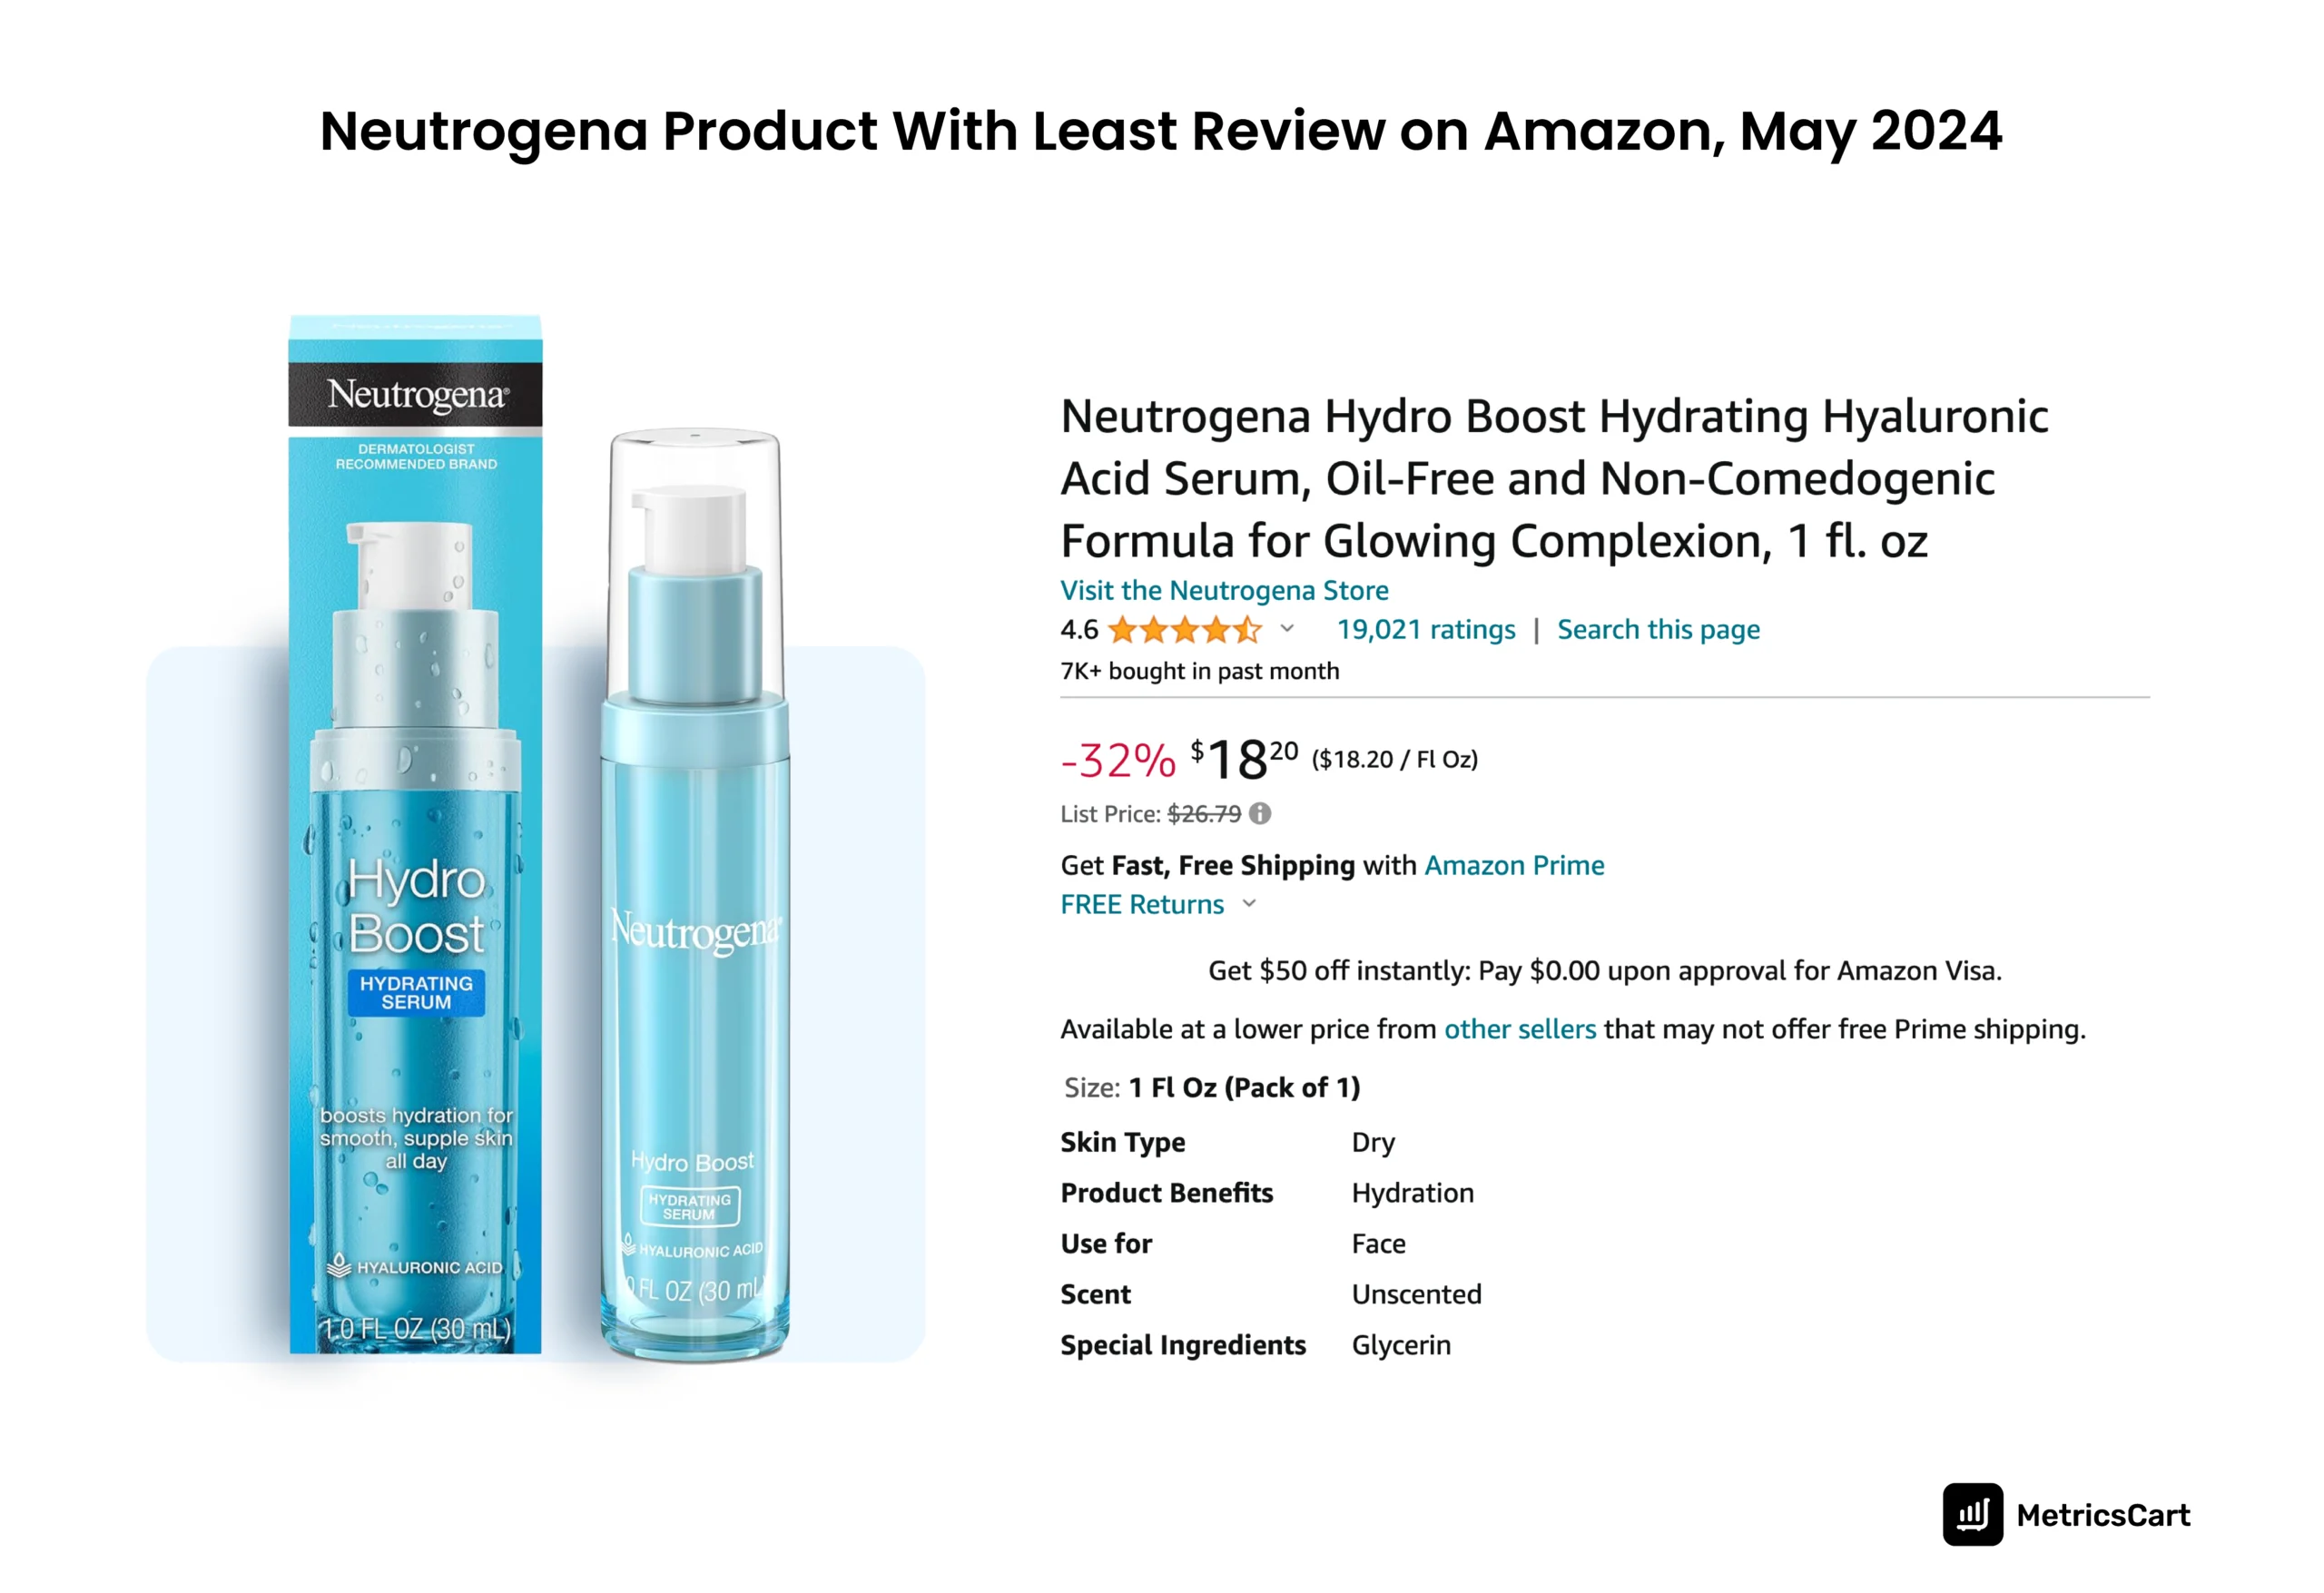 least reviewed Neutrogena product on Amazon for May 2024